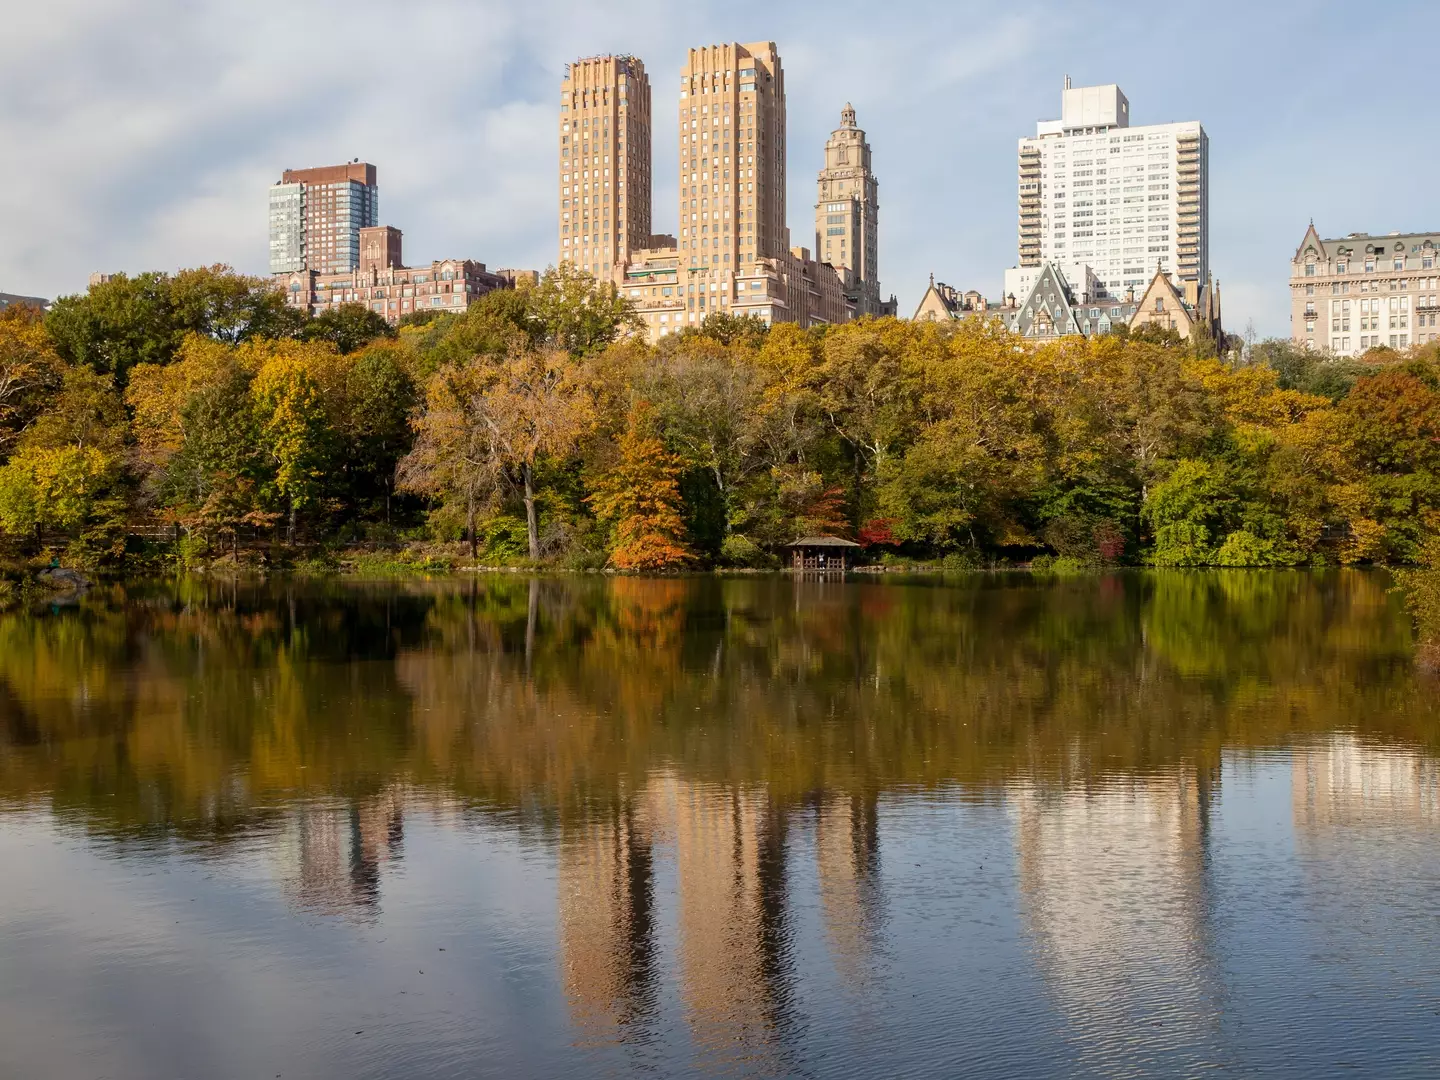 Central Park is now home to lakes and a zoo.